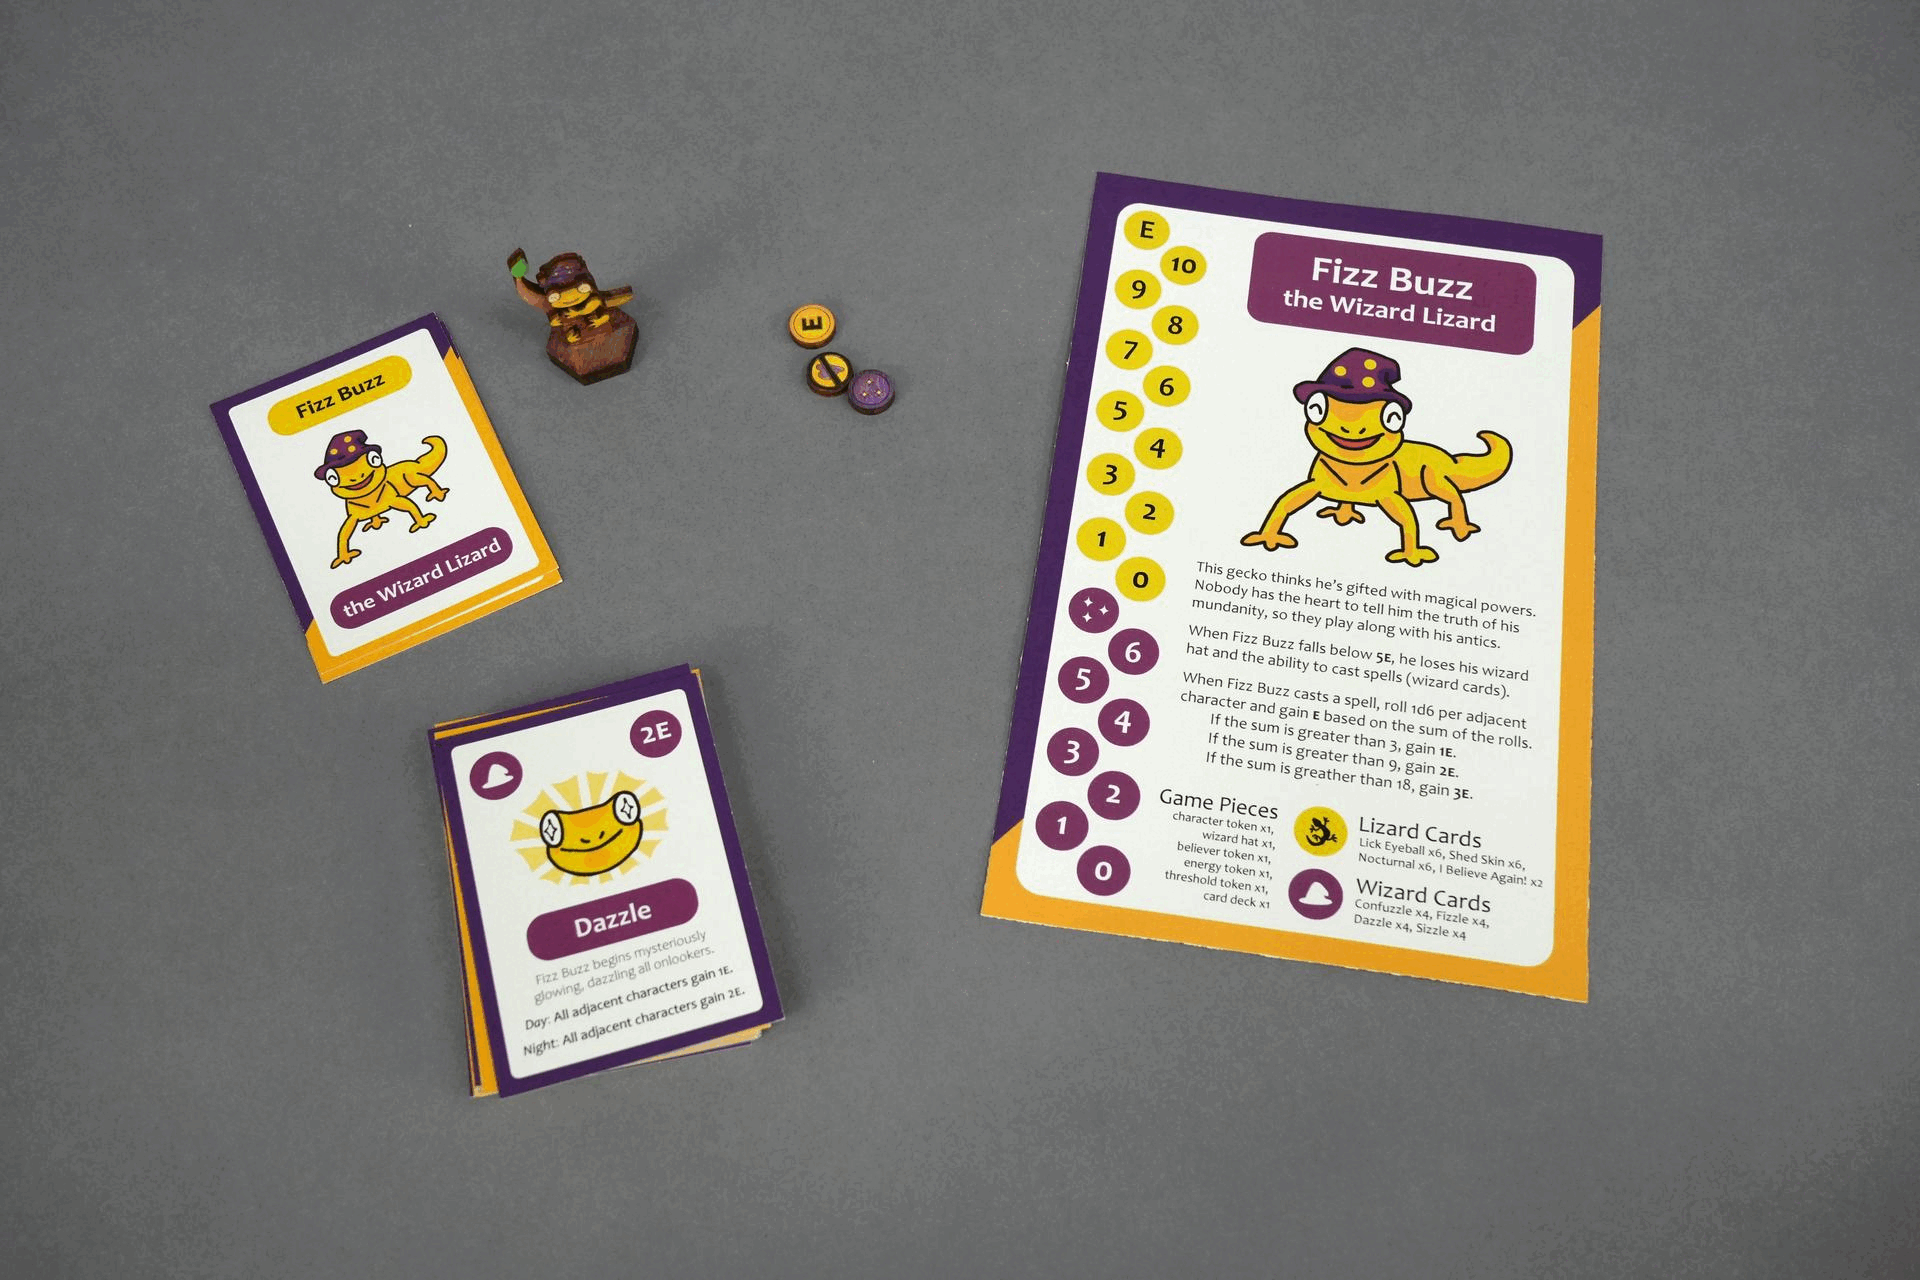 This gif swaps between several photos. They include a wooden character piece of a yellow gecko sitting on a tree wearing a purple wizard hat. The gecko, dubbed Fizz Buzz the Wizard Lizard, has an associated character card and character information sheet, along with cards and tracker tokens.